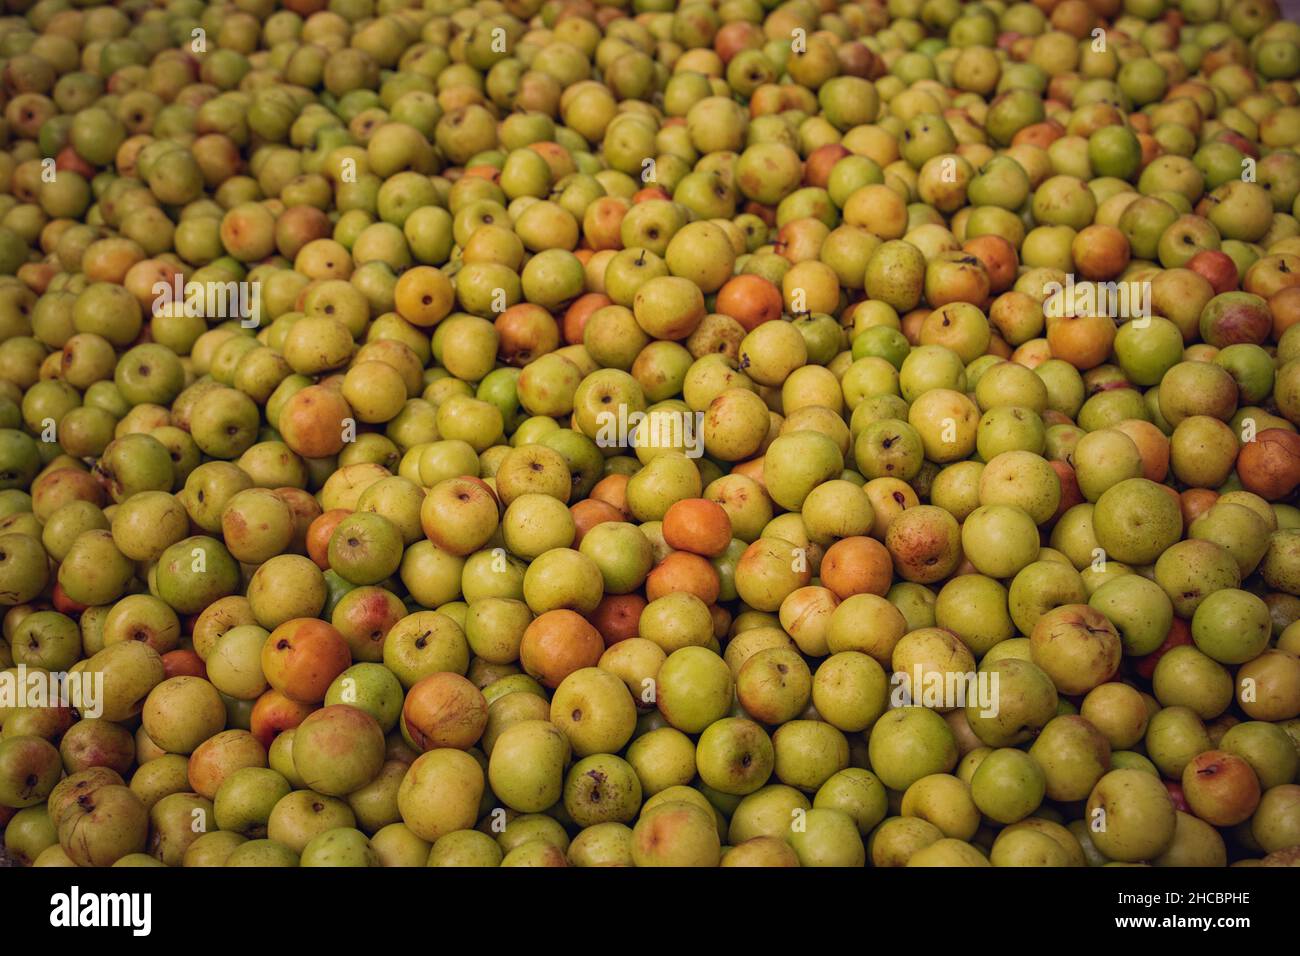 Bangladeshi Jujube fruits for sale in a village market Stock Photo